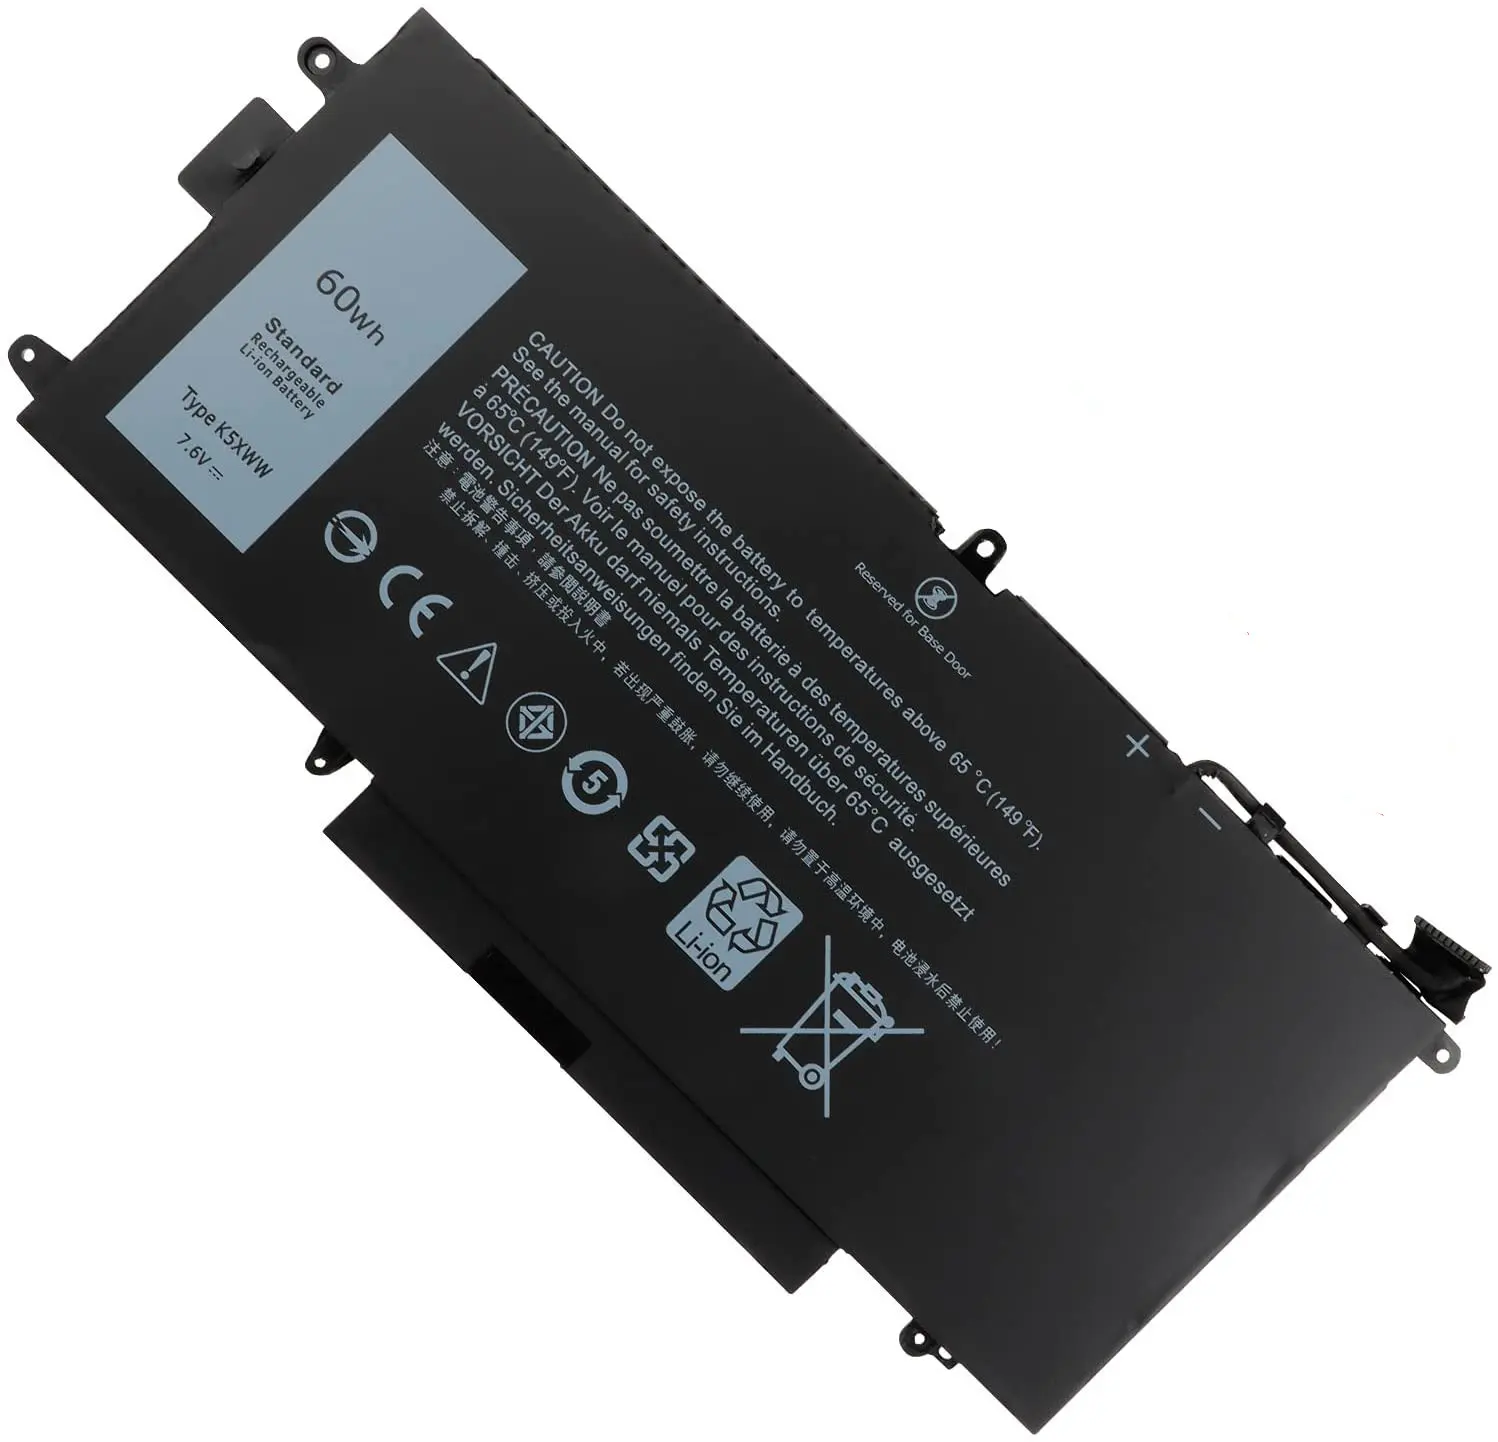 N18GG 6CYH6 71TG4 725KY J0PGR 60Wh 7.6V Laptop Battery Compatible for Dell Latitude 7389 5289 E5289 7390 2 in 1 Series Battery